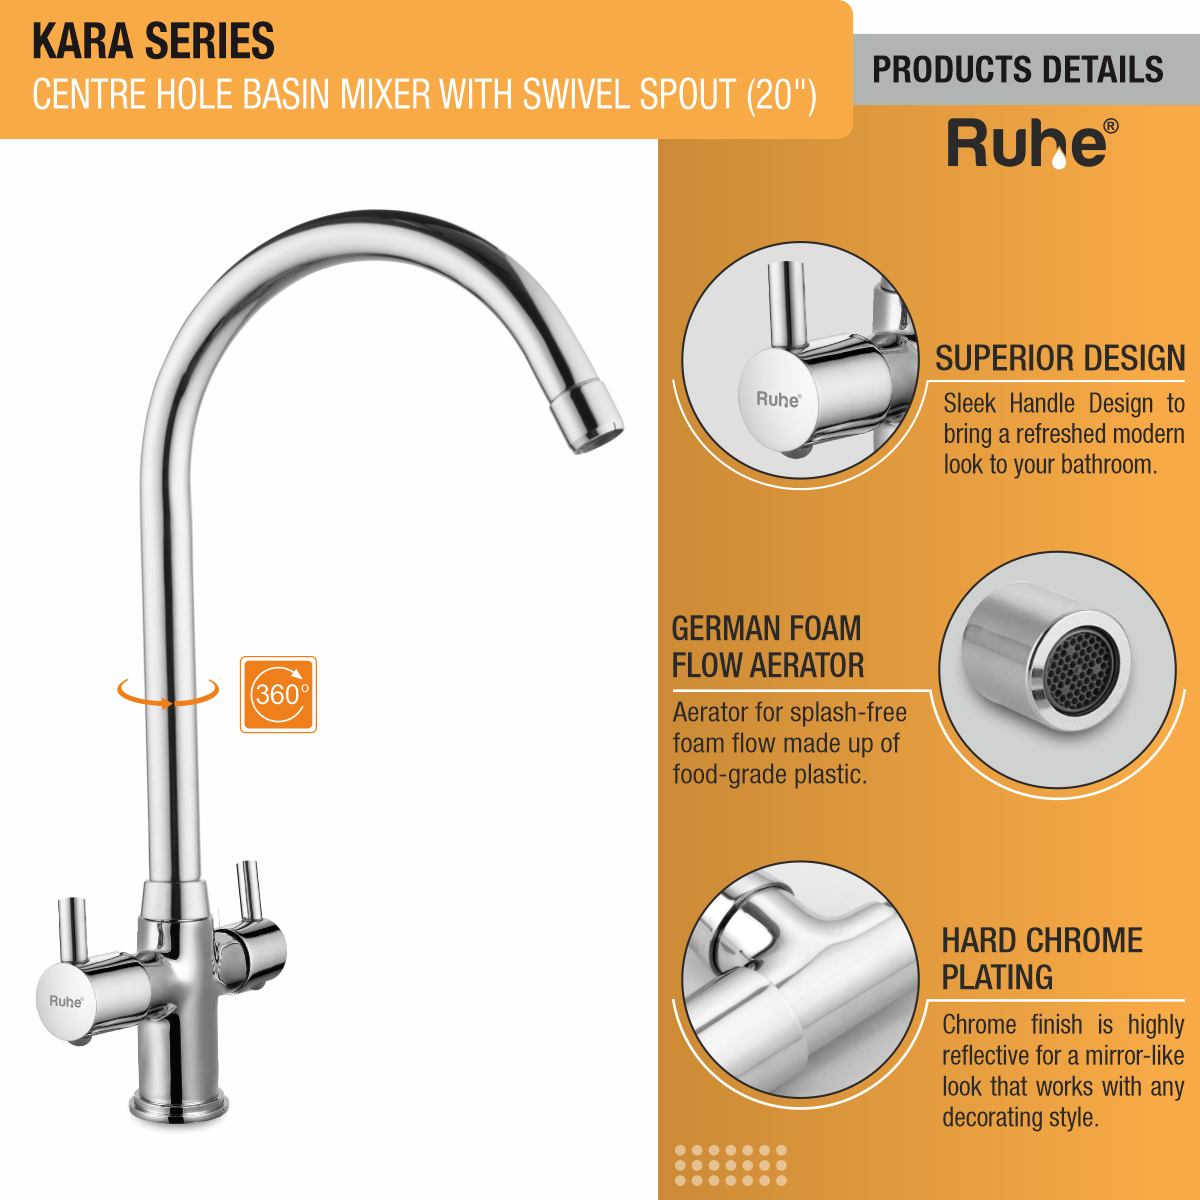 Kara Centre Hole Basin Mixer with Large (20 inches) Round Swivel Spout Faucet product details